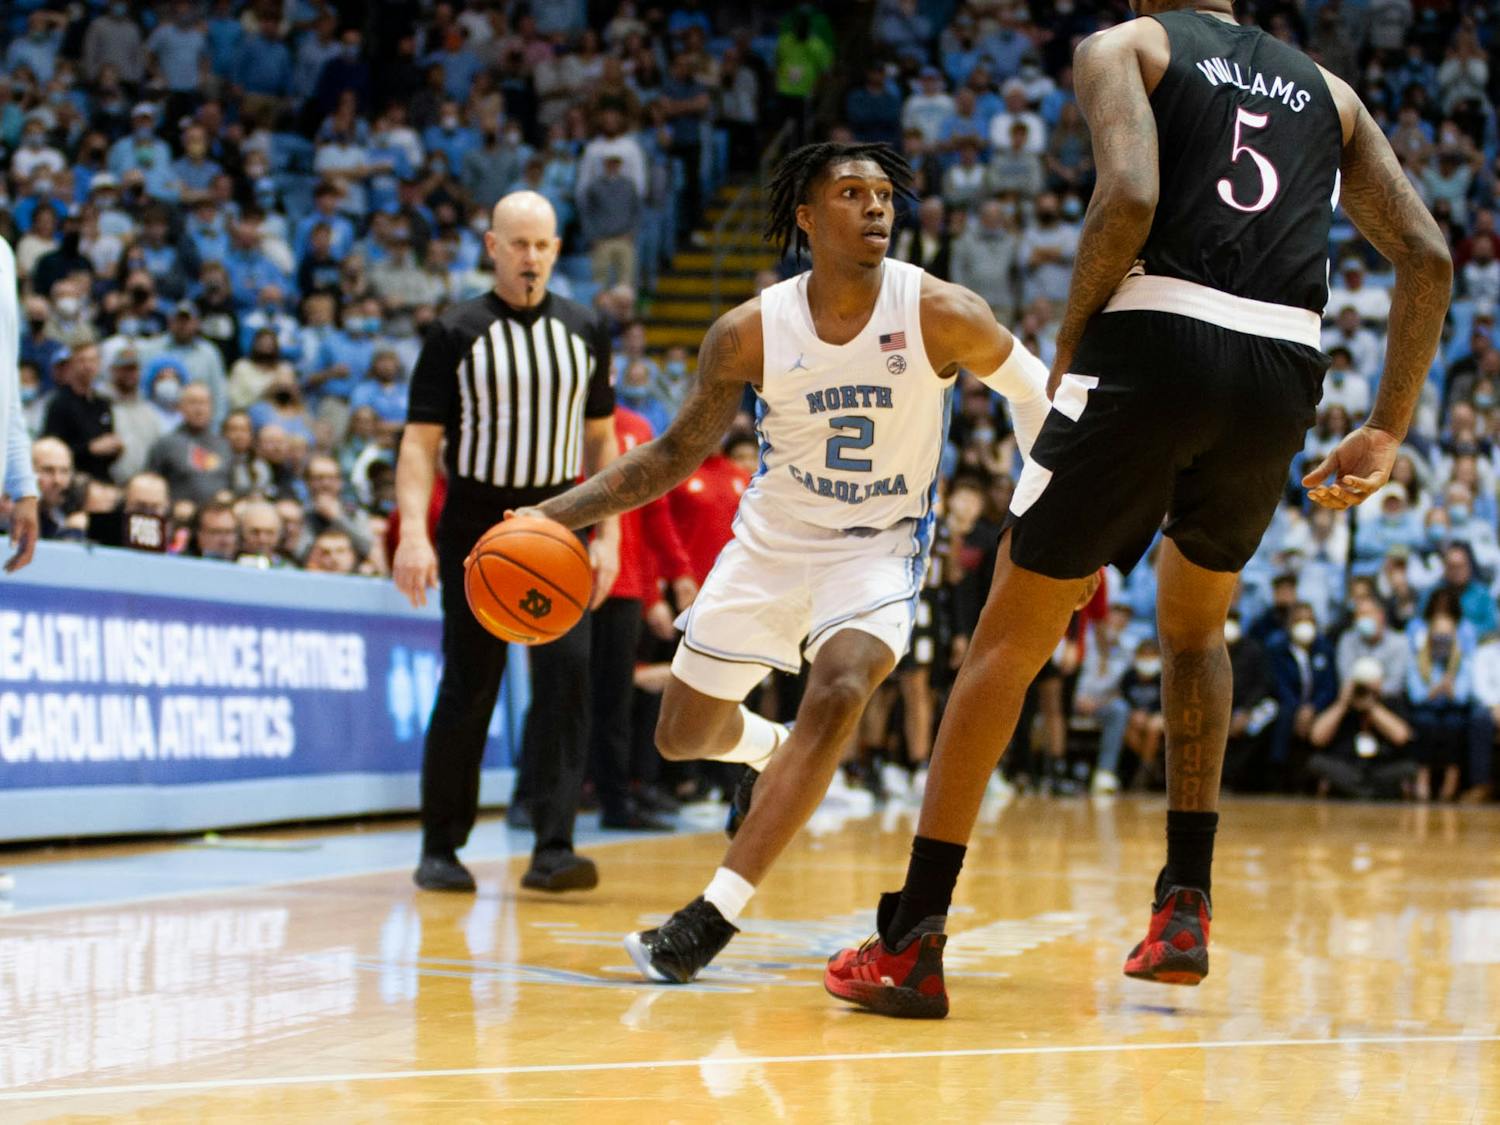 UNC sophomore guard Caleb Love (2) evades a defender during a home men's basketball game against Louisville on Monday, Feb. 21, 2022. UNC won 70-63.